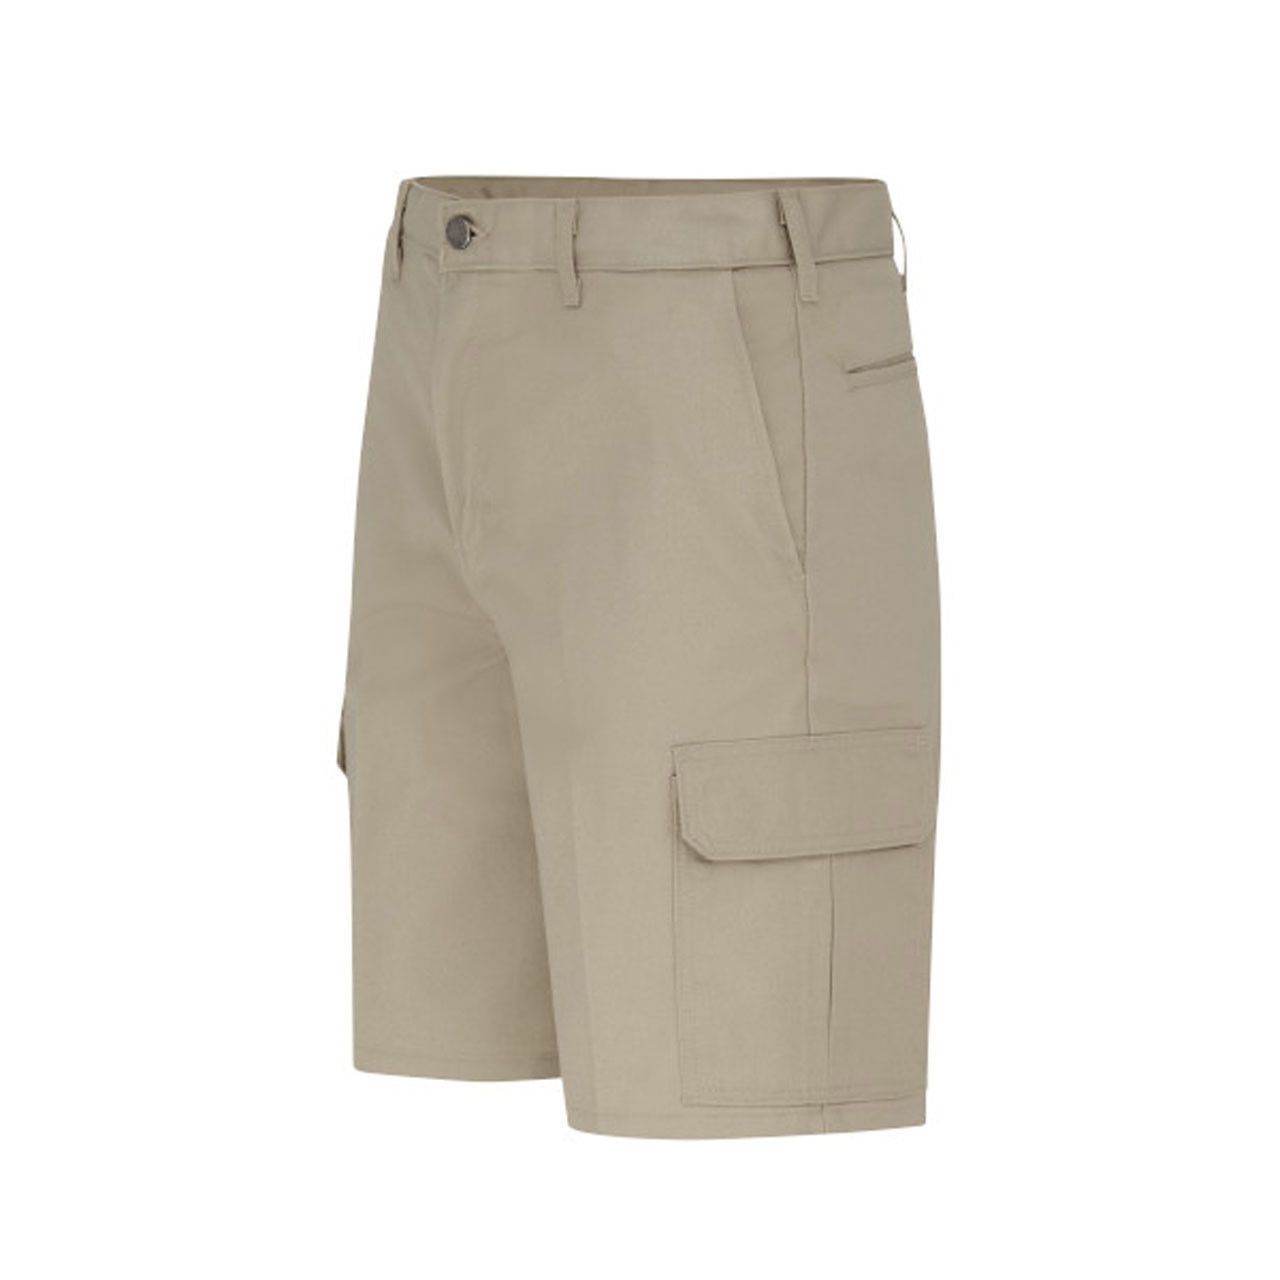 What fabric composition does the Dickies cargo shorts, specifically the LR00 model, have?